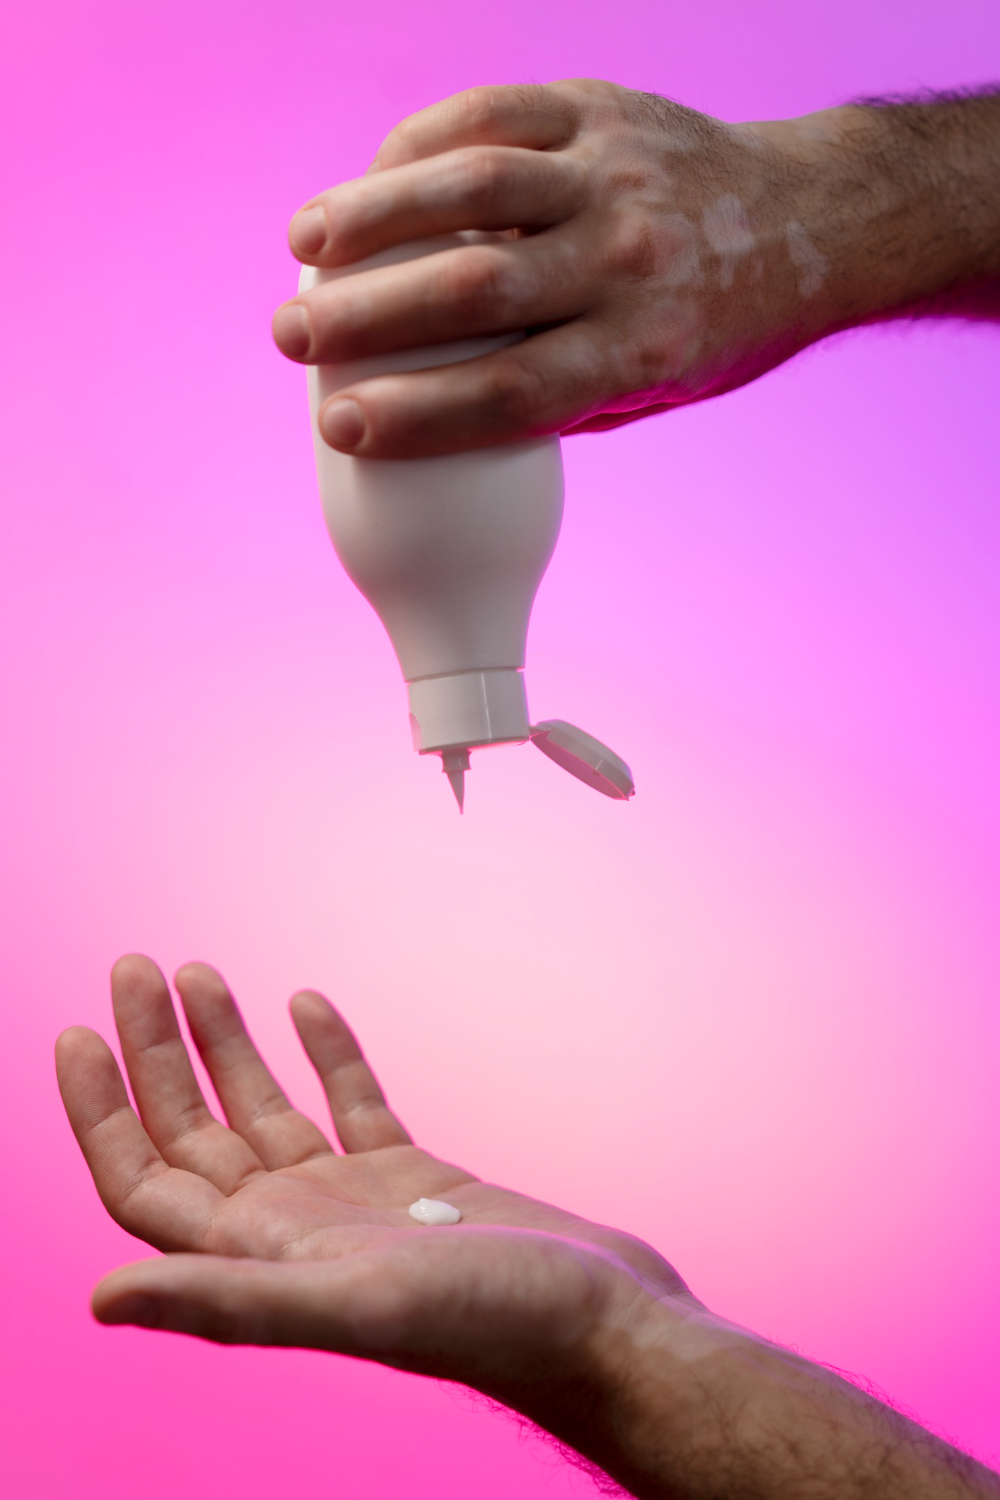 Is Lotion Good For Penis? Options To Extend Your Play Time